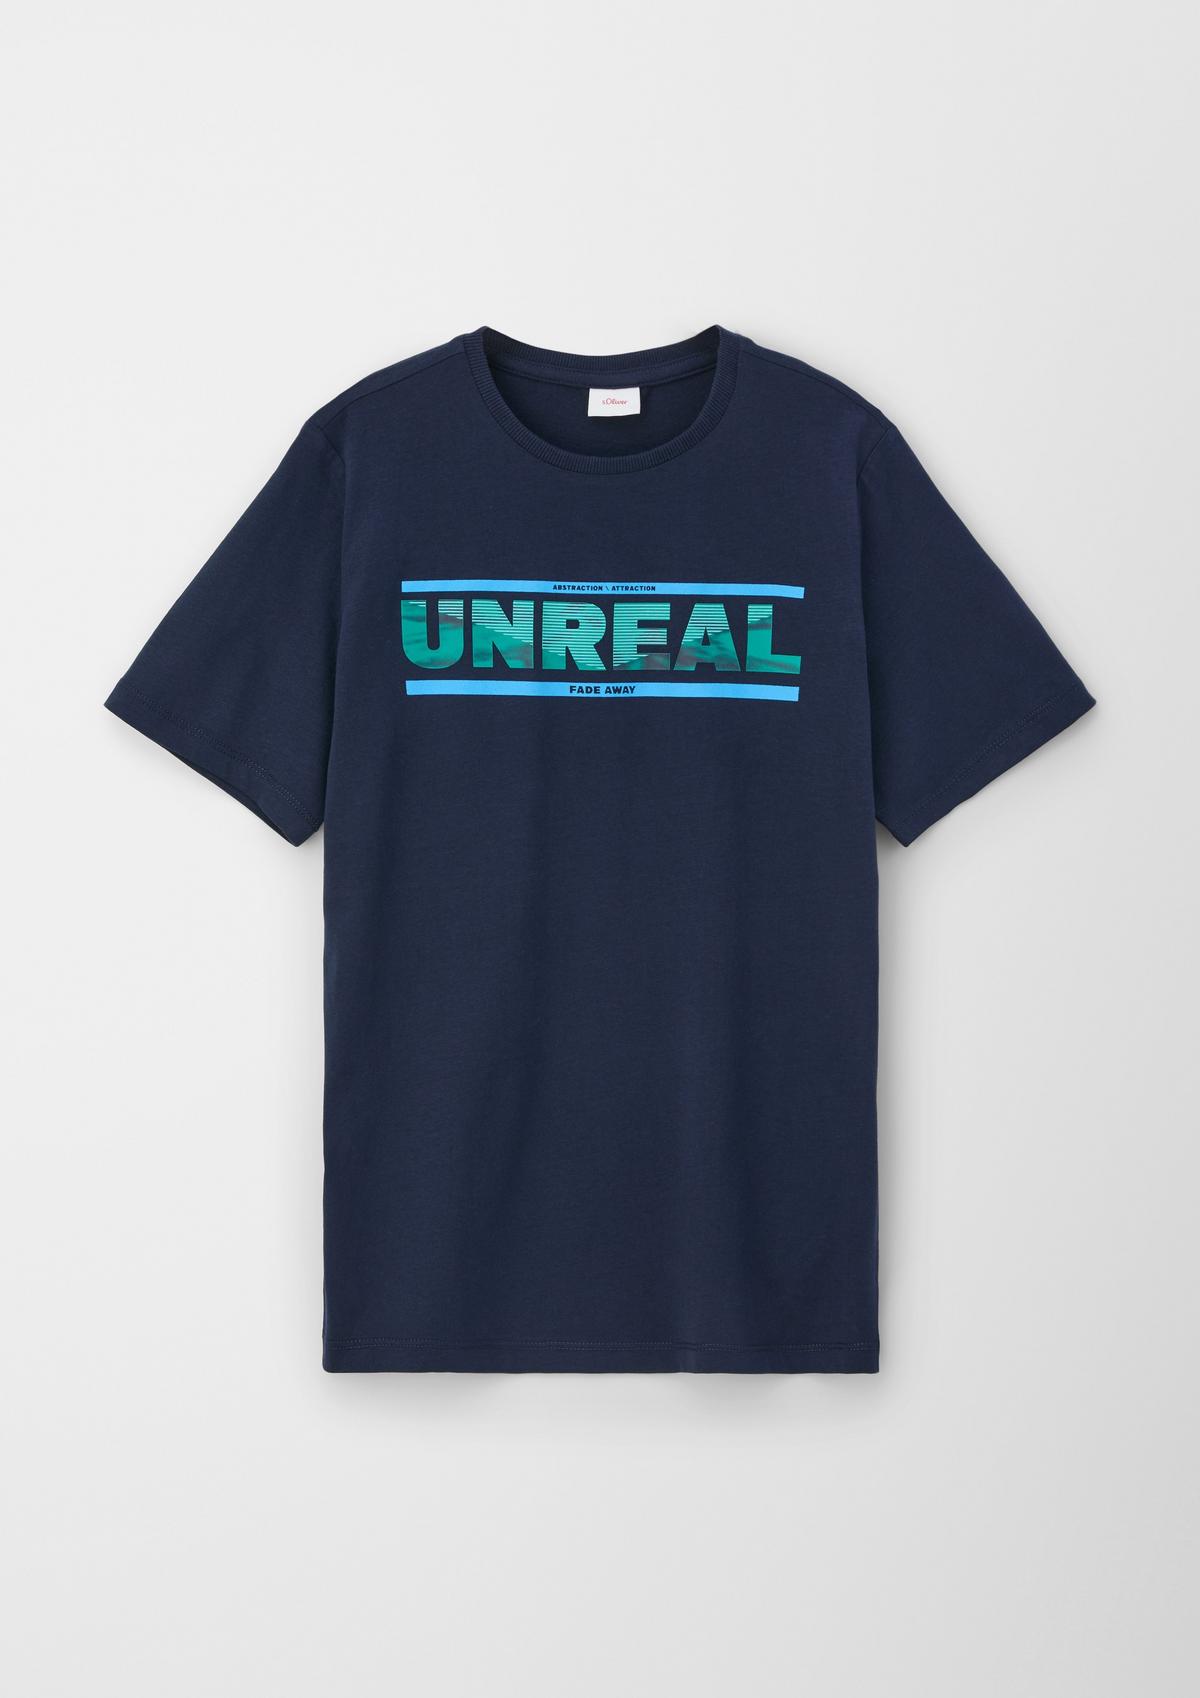 Order T-shirts for boys teens online and